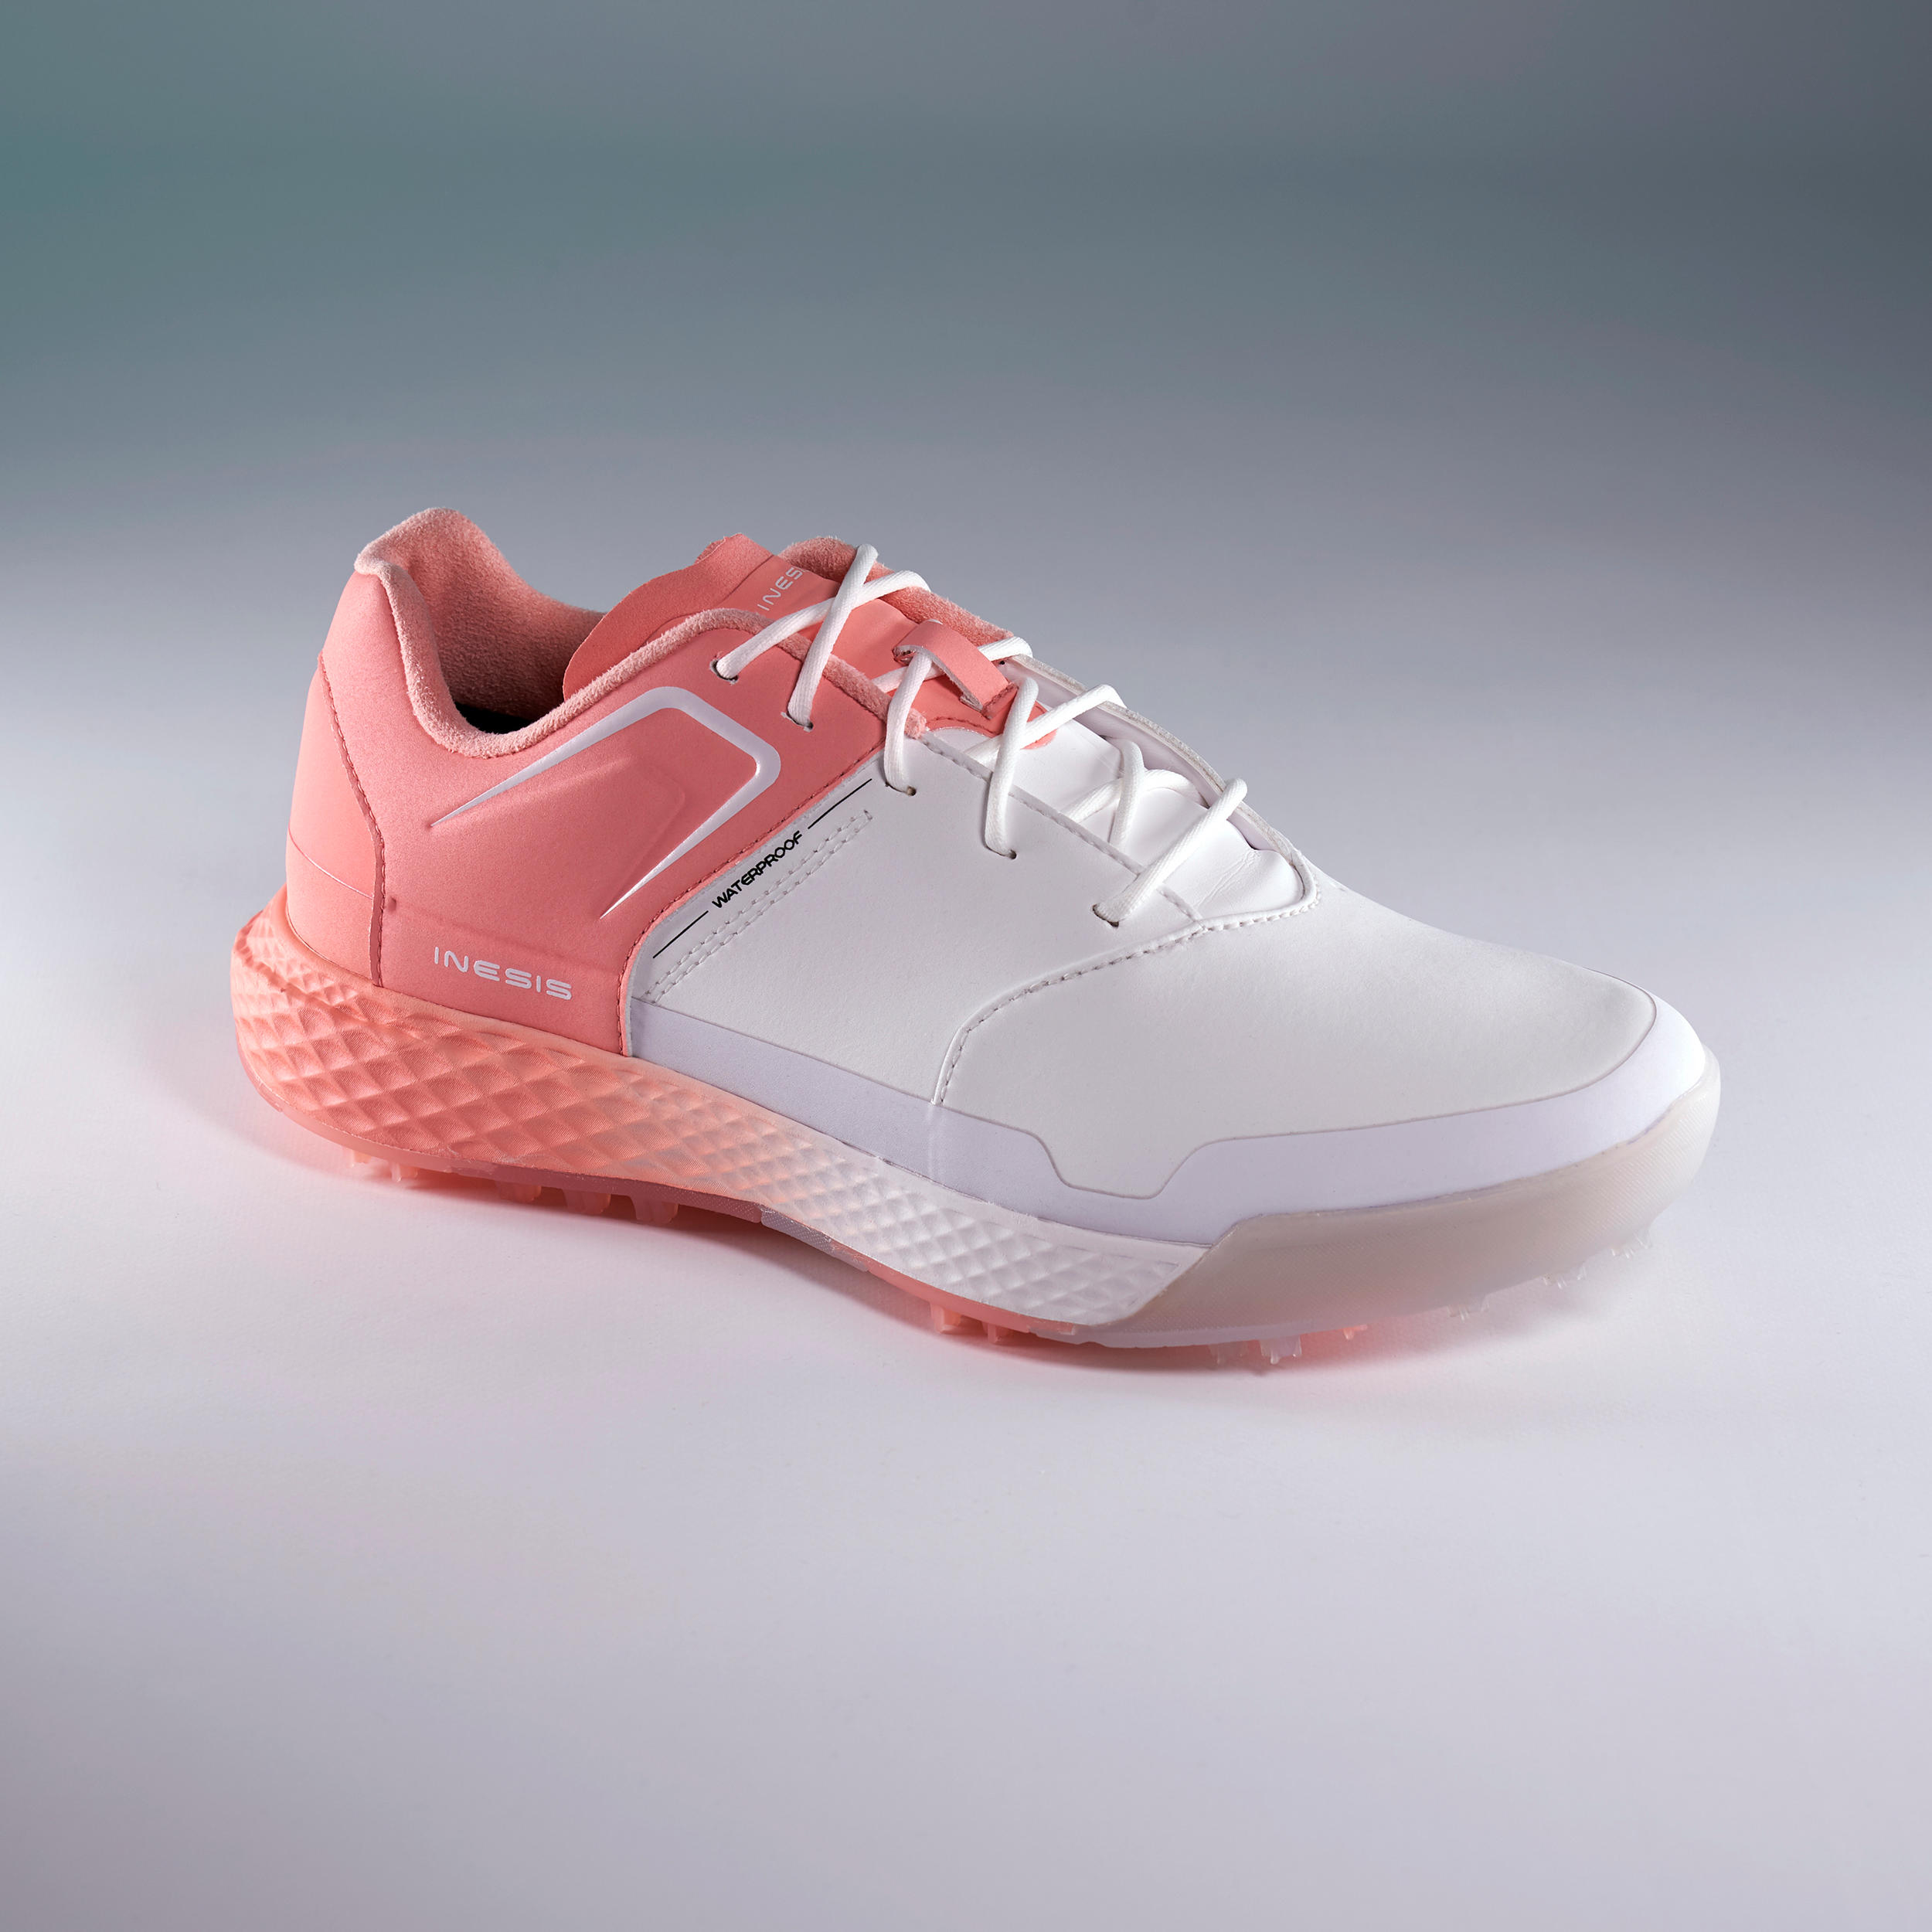 LADIES GRIP WATERPROOF GOLF SHOES WHITE AND PINK 2/13